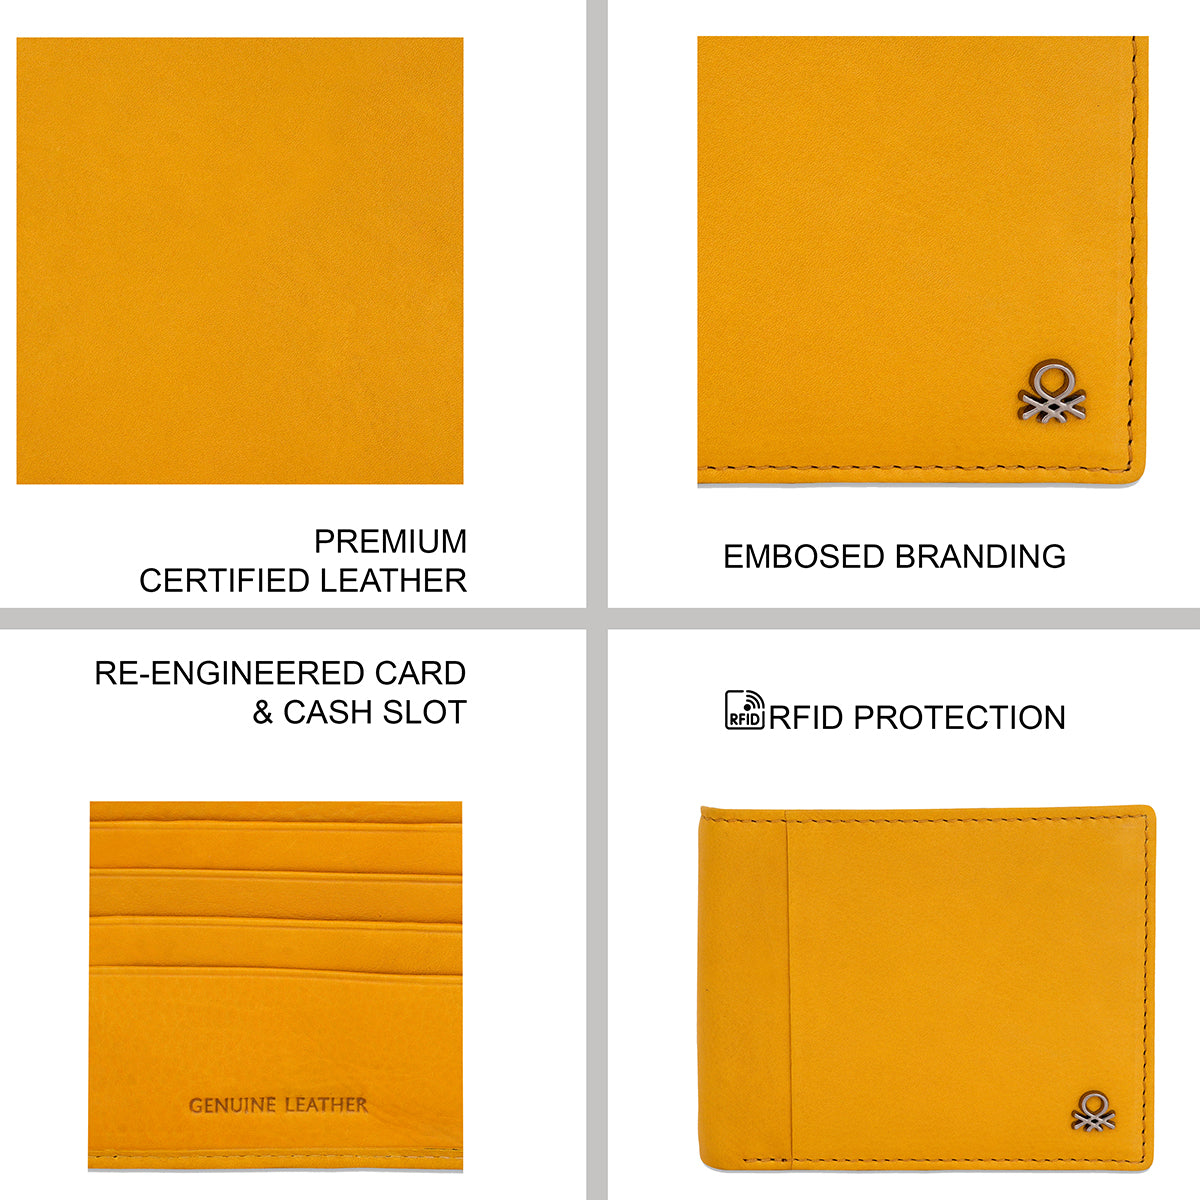 United Colors of Benetton Marcell Global Coin Wallet yellow